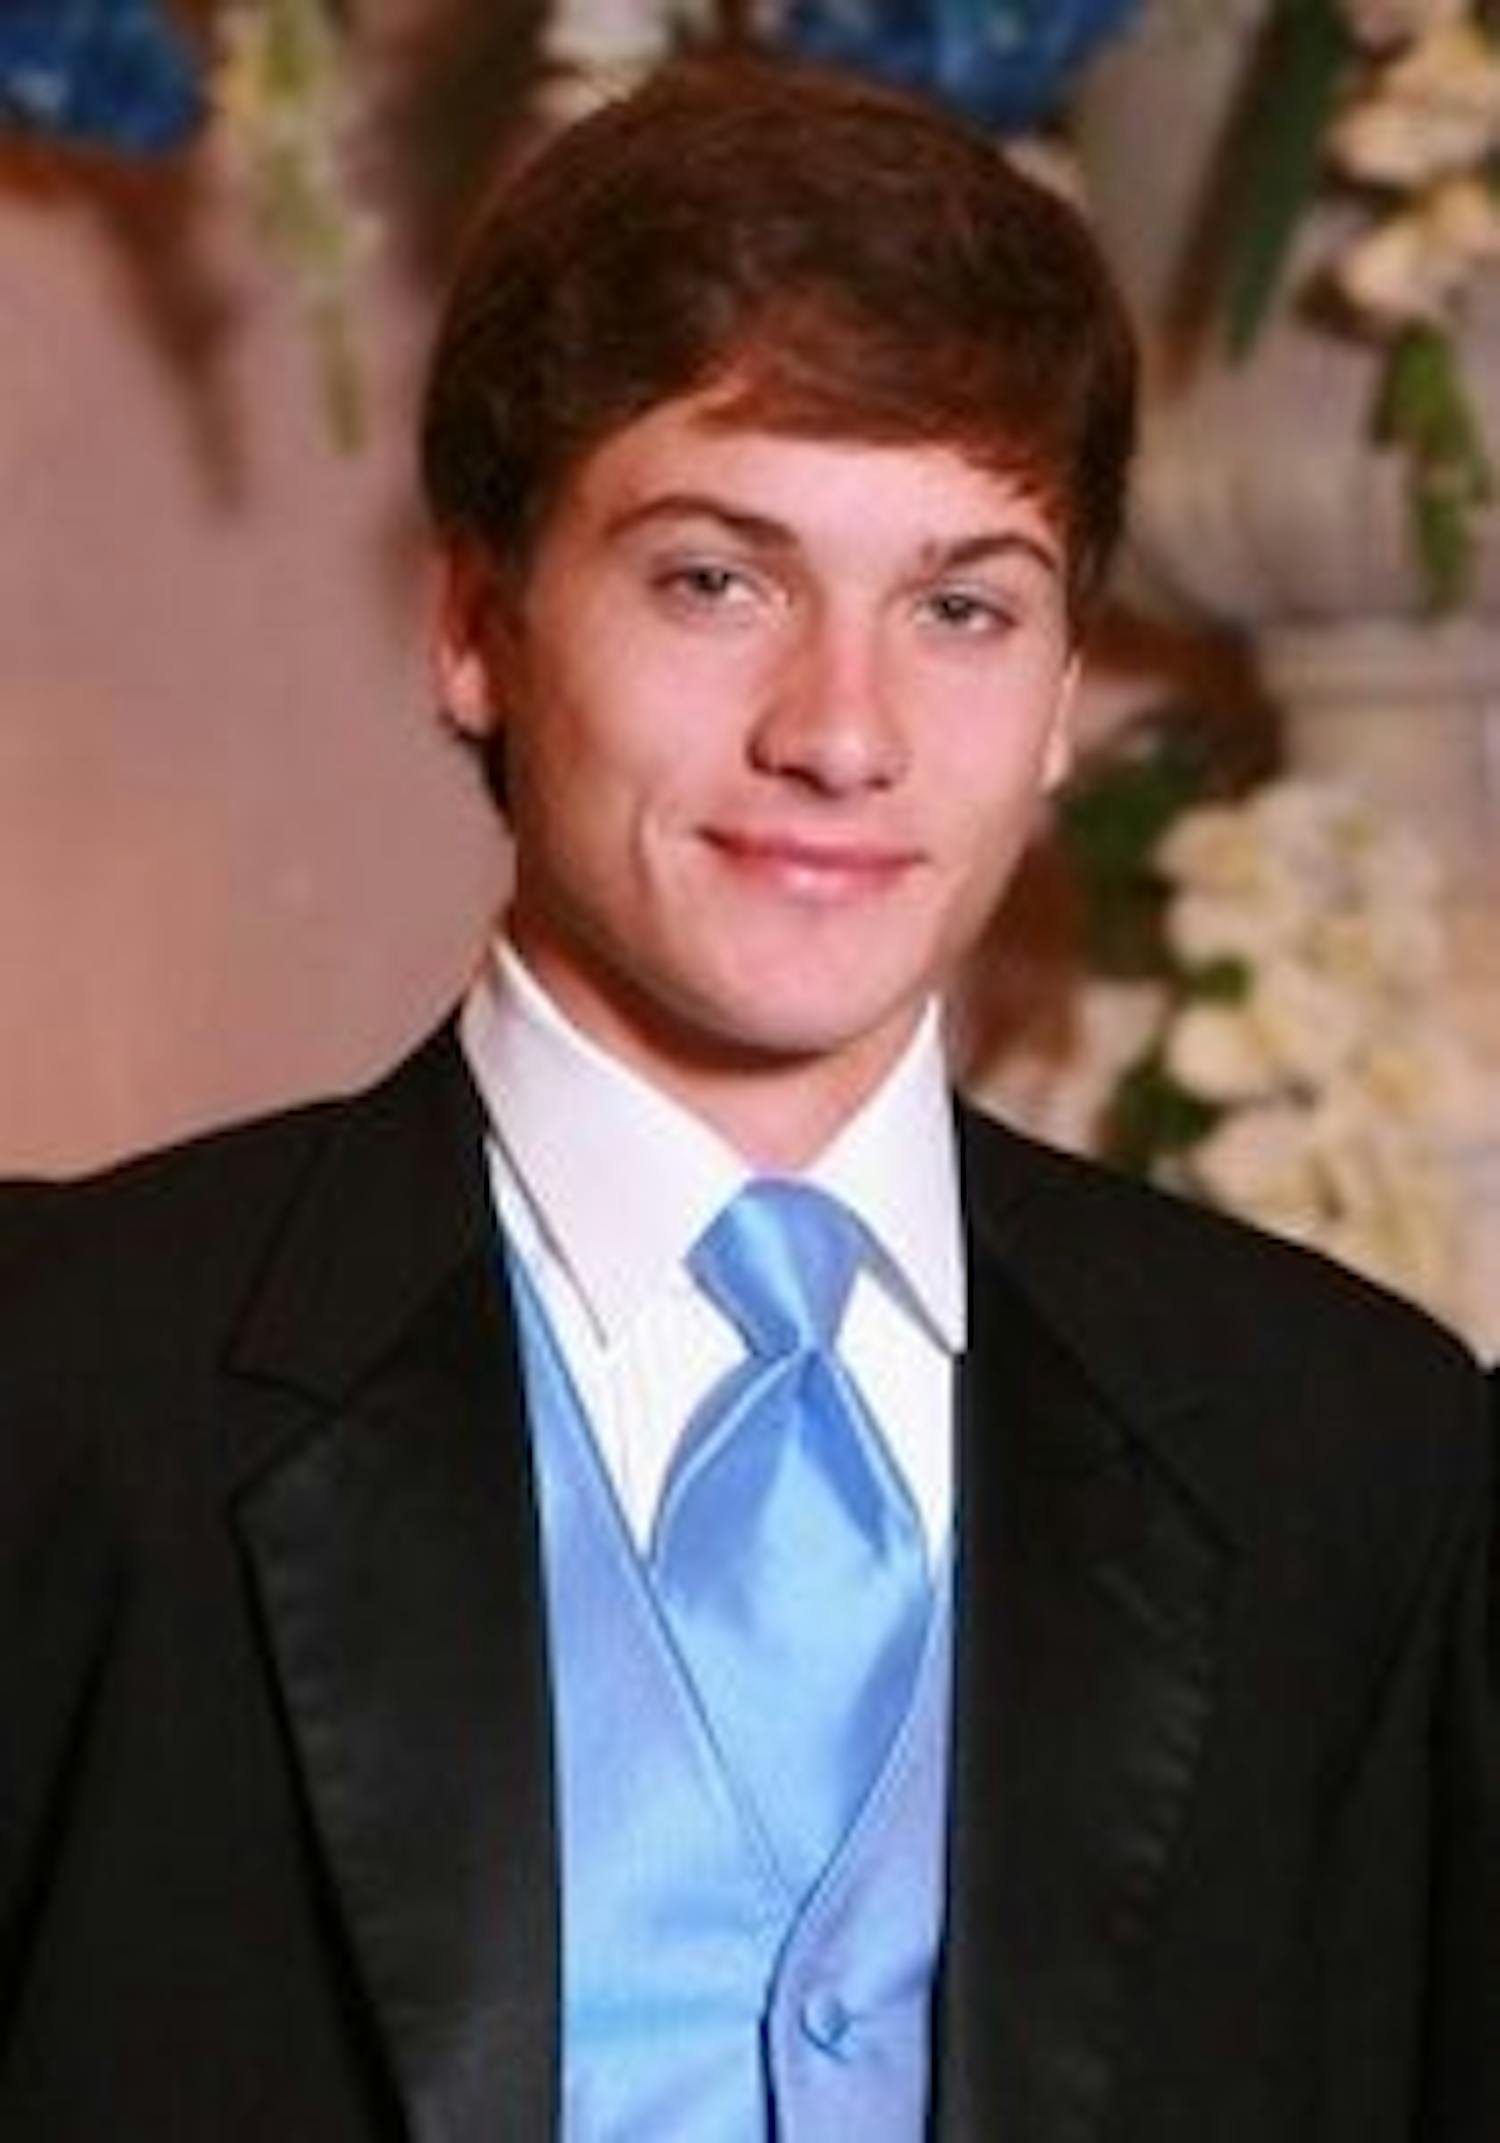 John Caleb Kearly, of Dothan died in car accident Sunday, July 29. He is the third Auburn student to lose their life in a car accident since the beginning of the summer semester (Courtesy of rickeystokesnews.com)